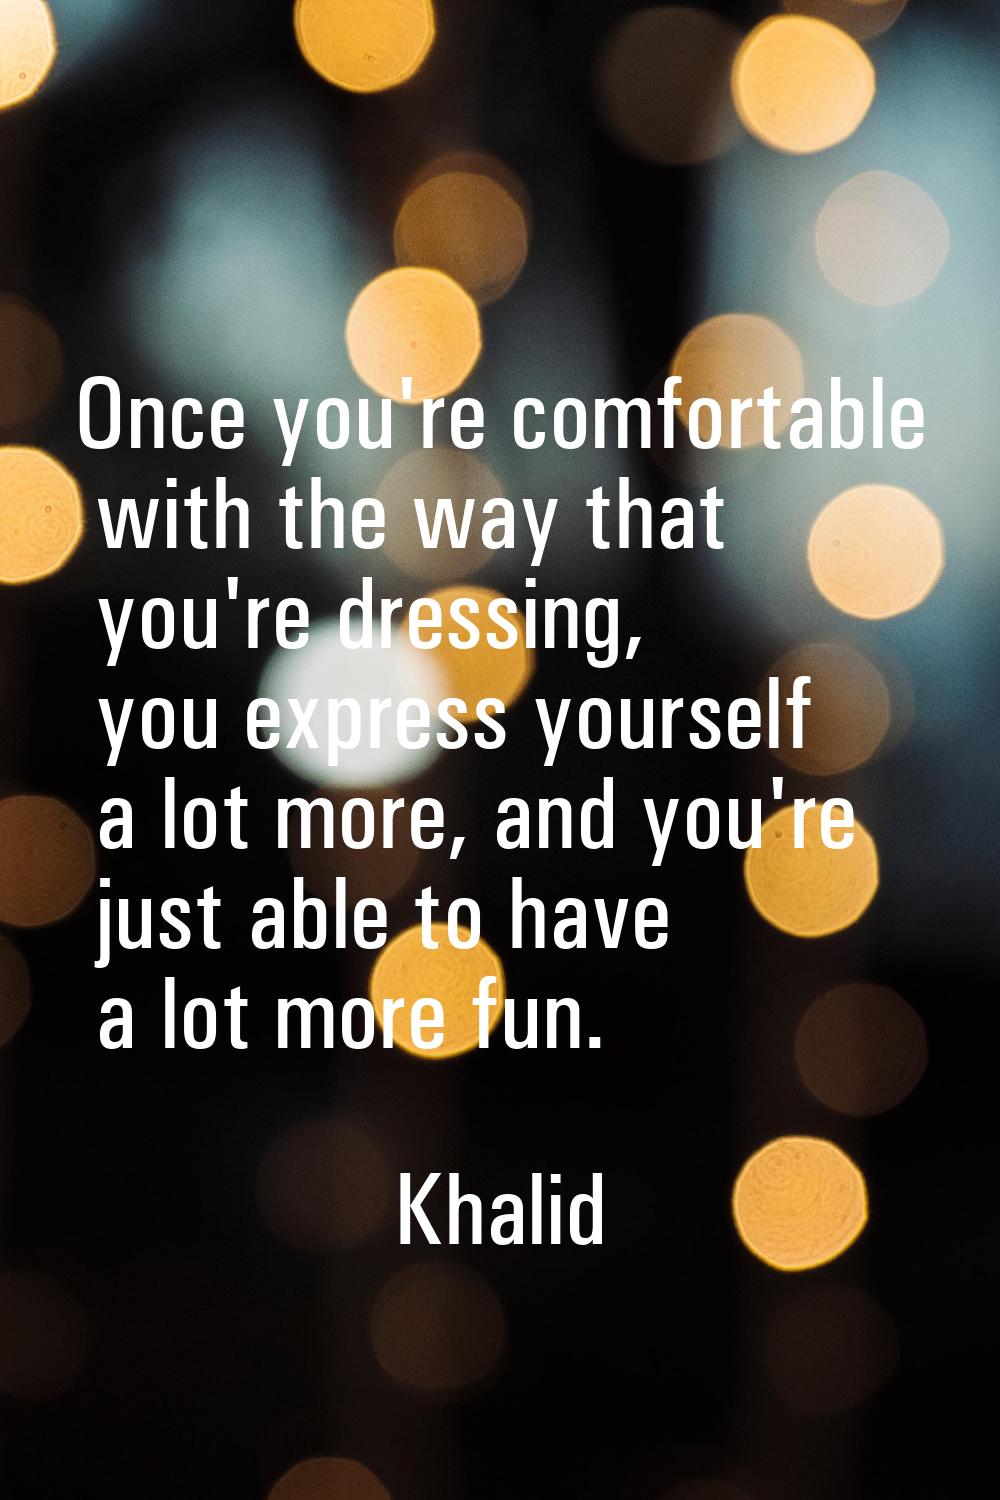 Once you're comfortable with the way that you're dressing, you express yourself a lot more, and you